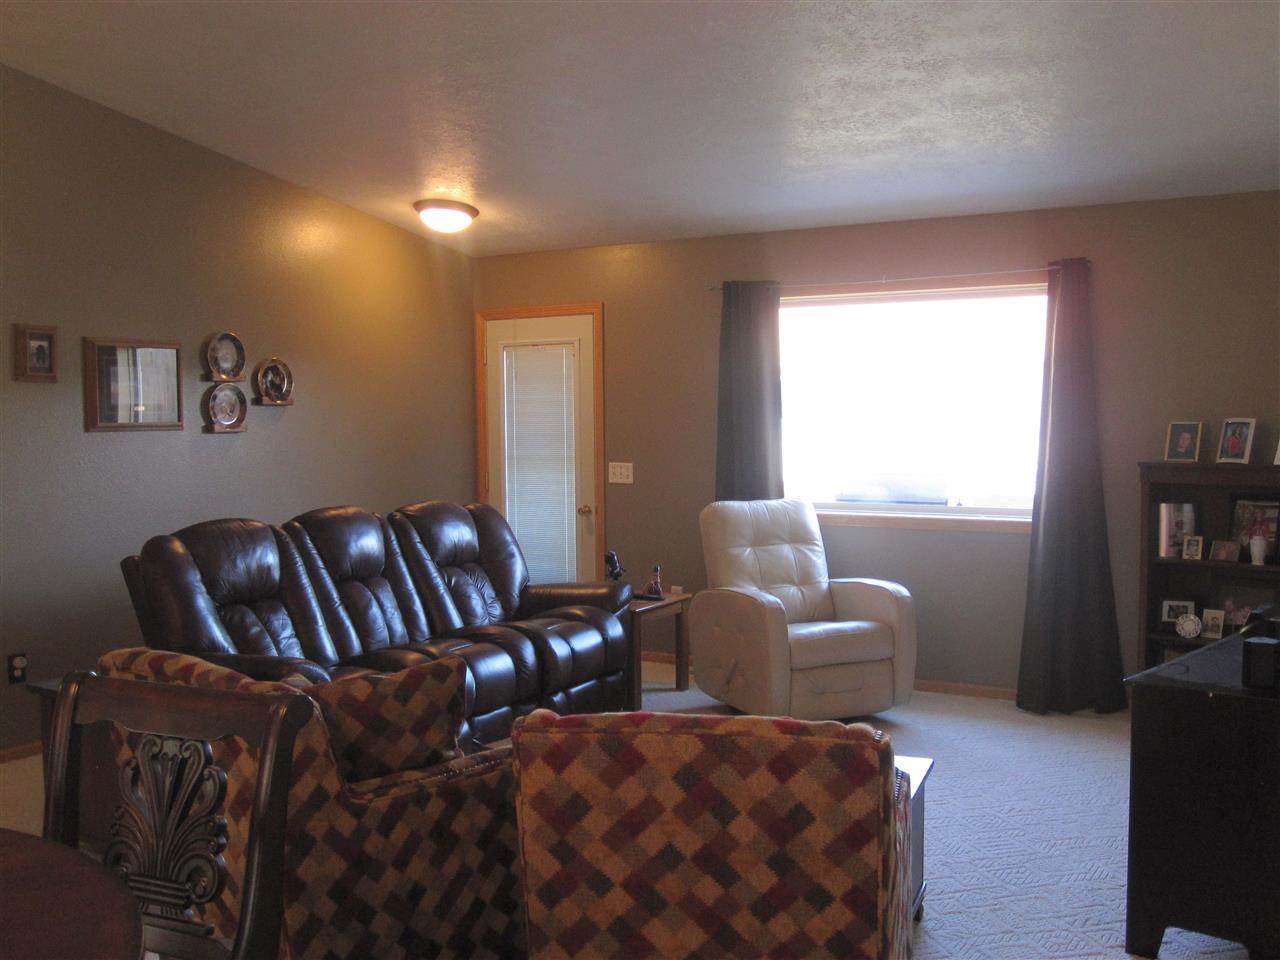 2016 NW 13th St, Minot, ND 58703